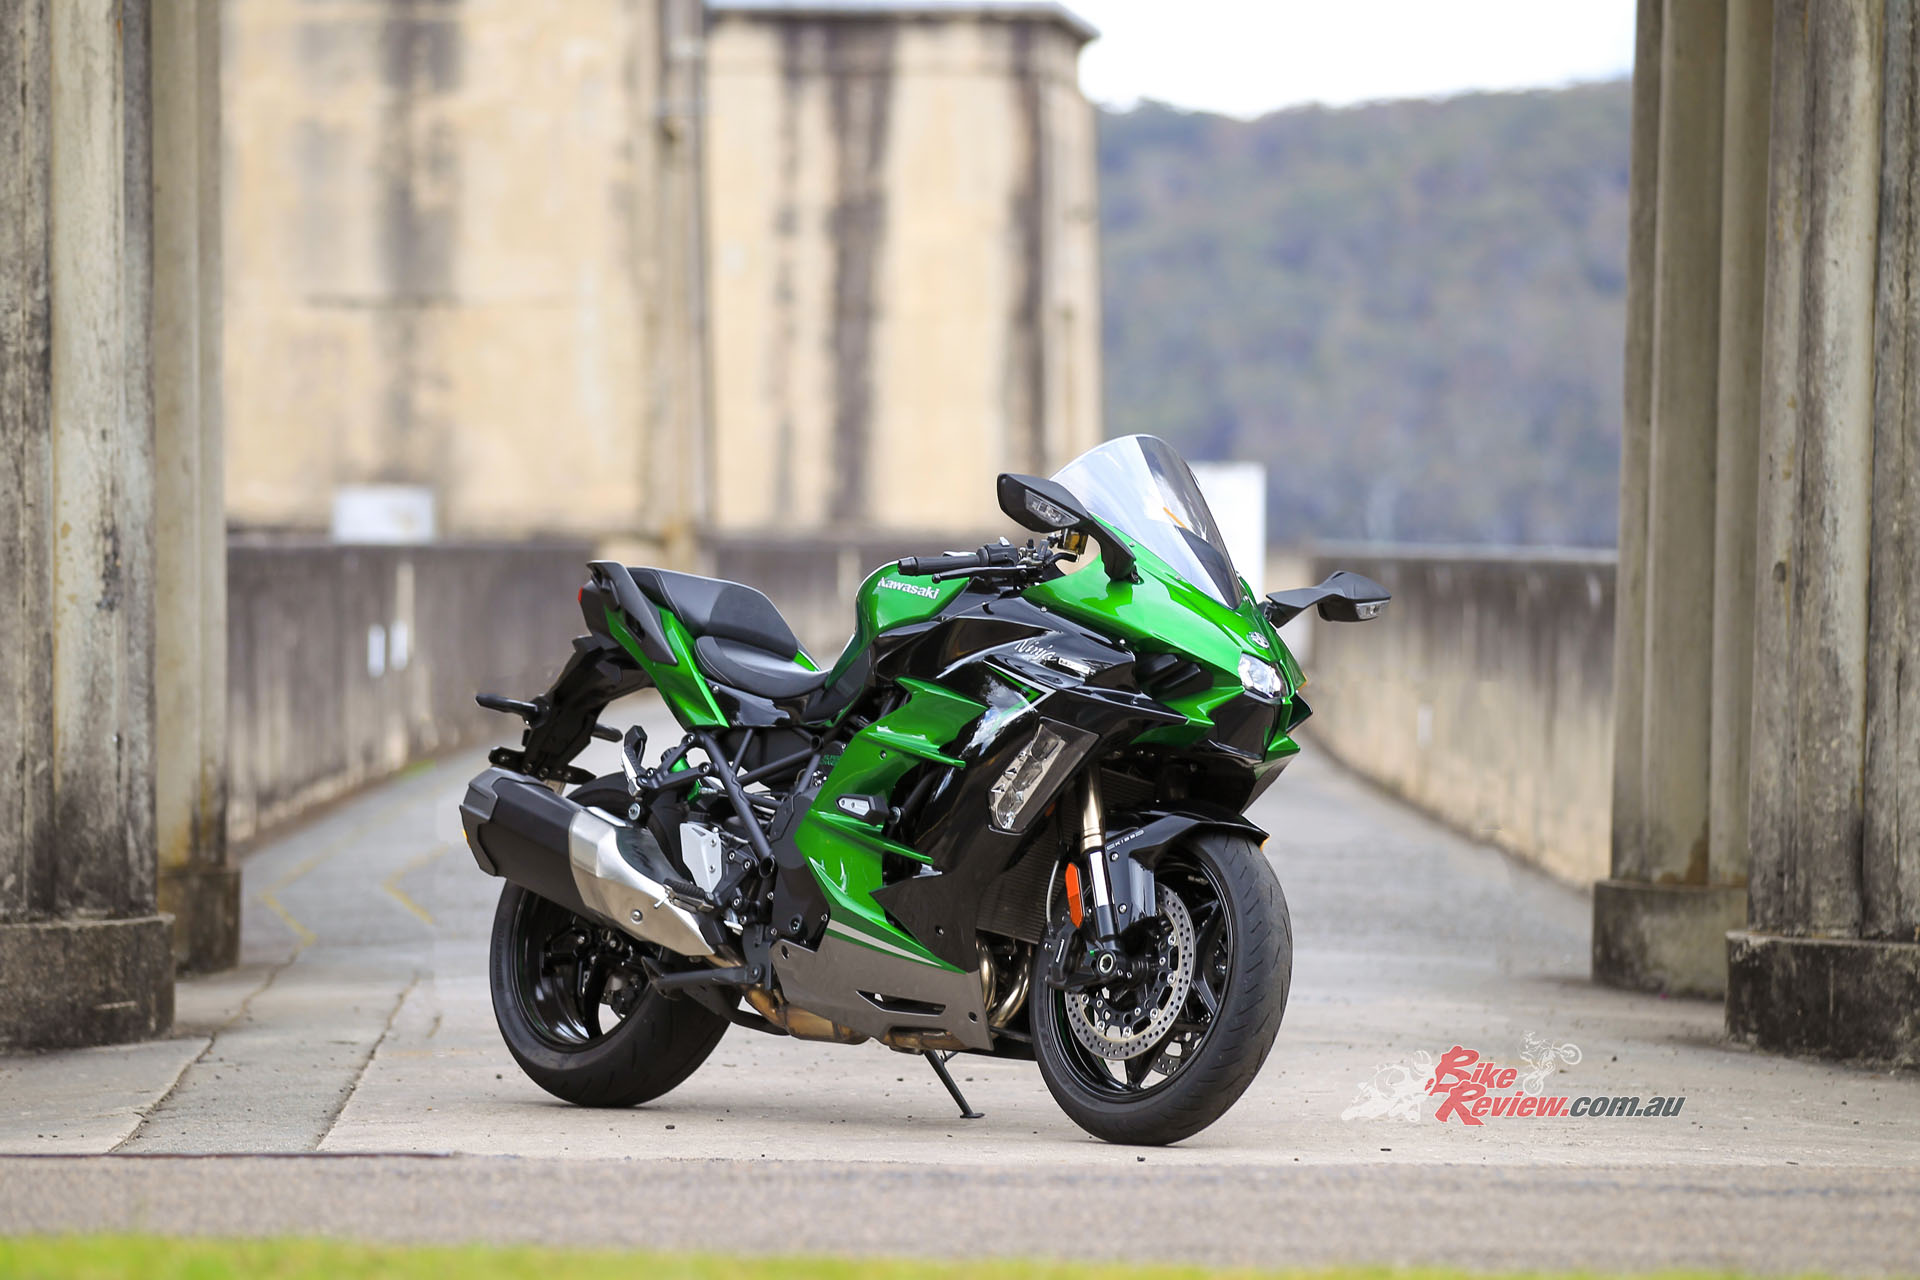 Zane finally found out what a bitter goodbye was to a motorcycle he didn't even own! Check out what he had to say about the 2022 Kawasaki Ninja H2 SX.